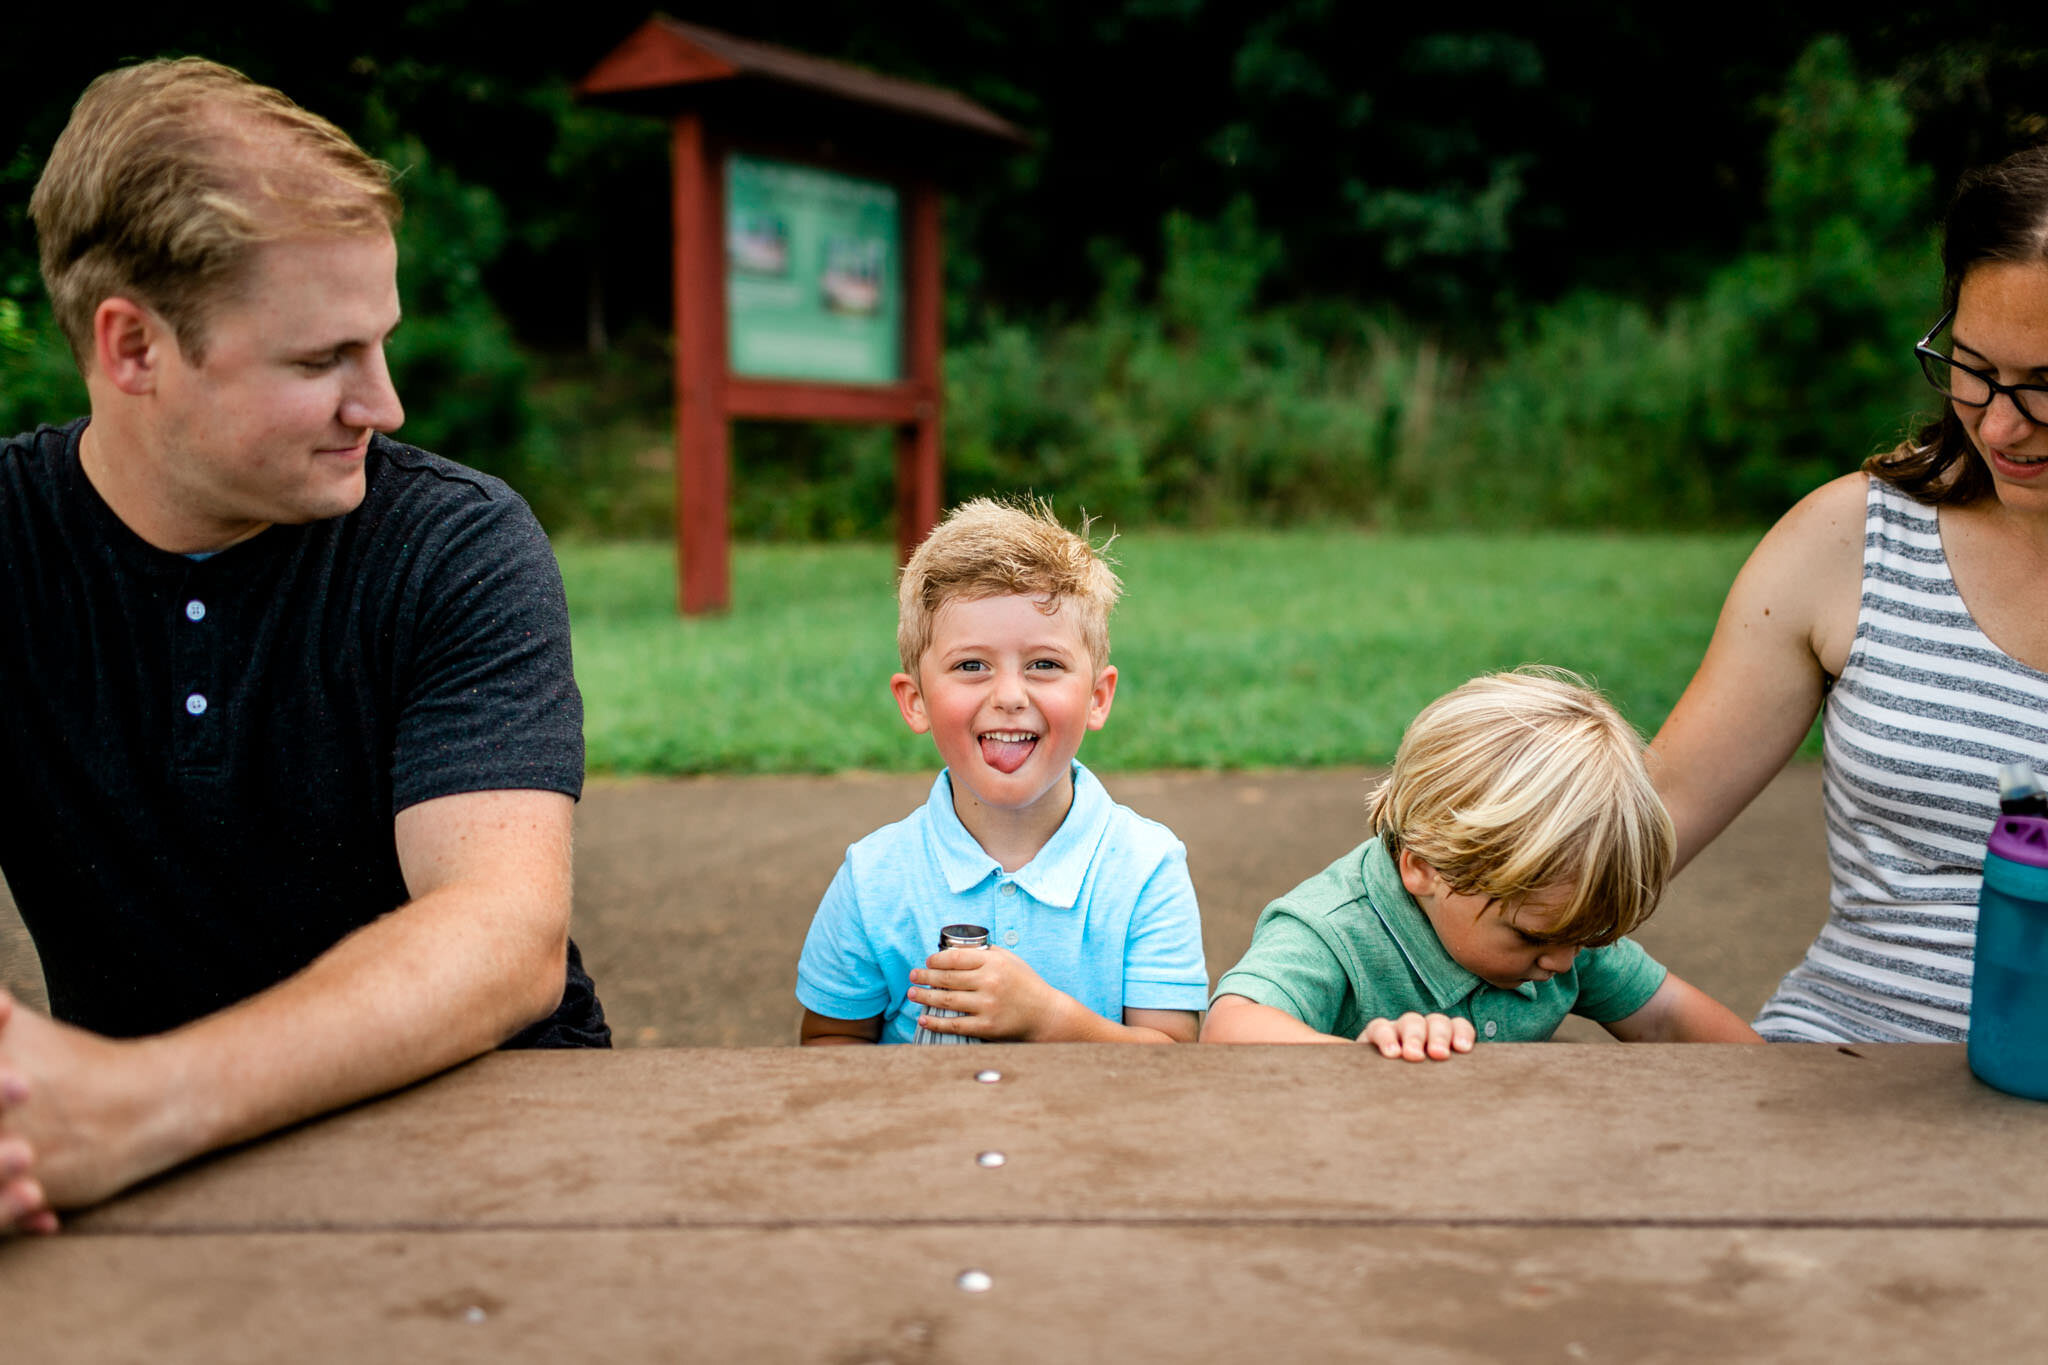 Raleigh Family Photographer | Umstead Park | By G. Lin Photography | Young boy smiling